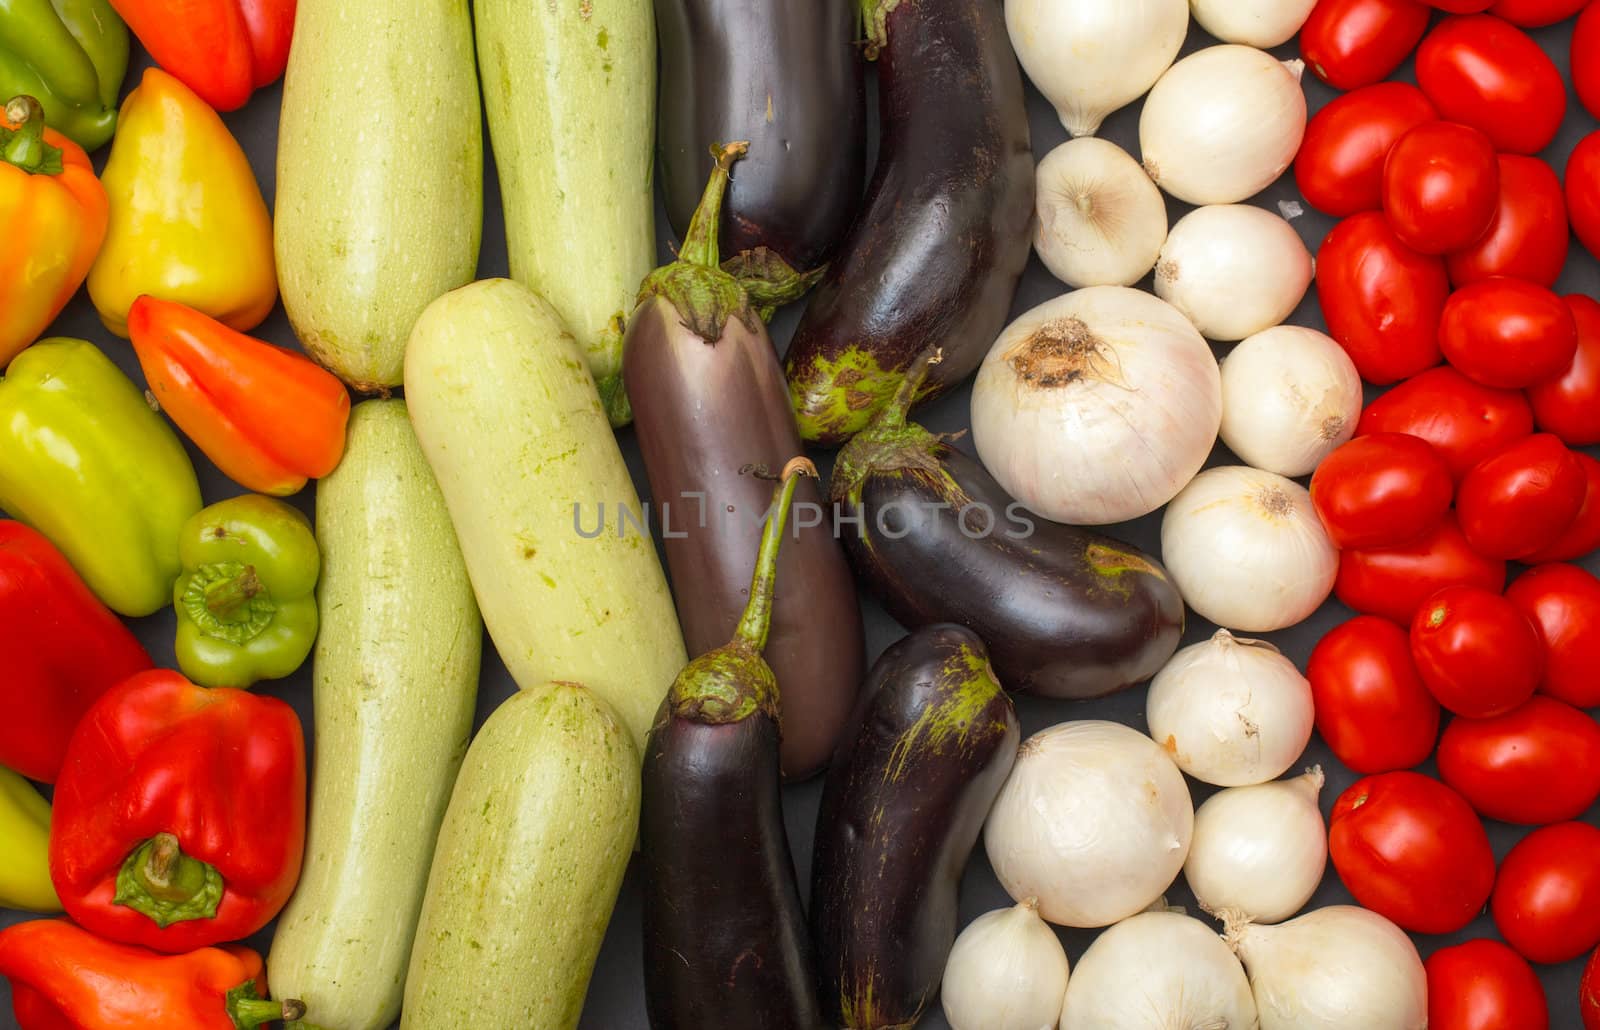 Multicolored Vegetable Variety background, assortment